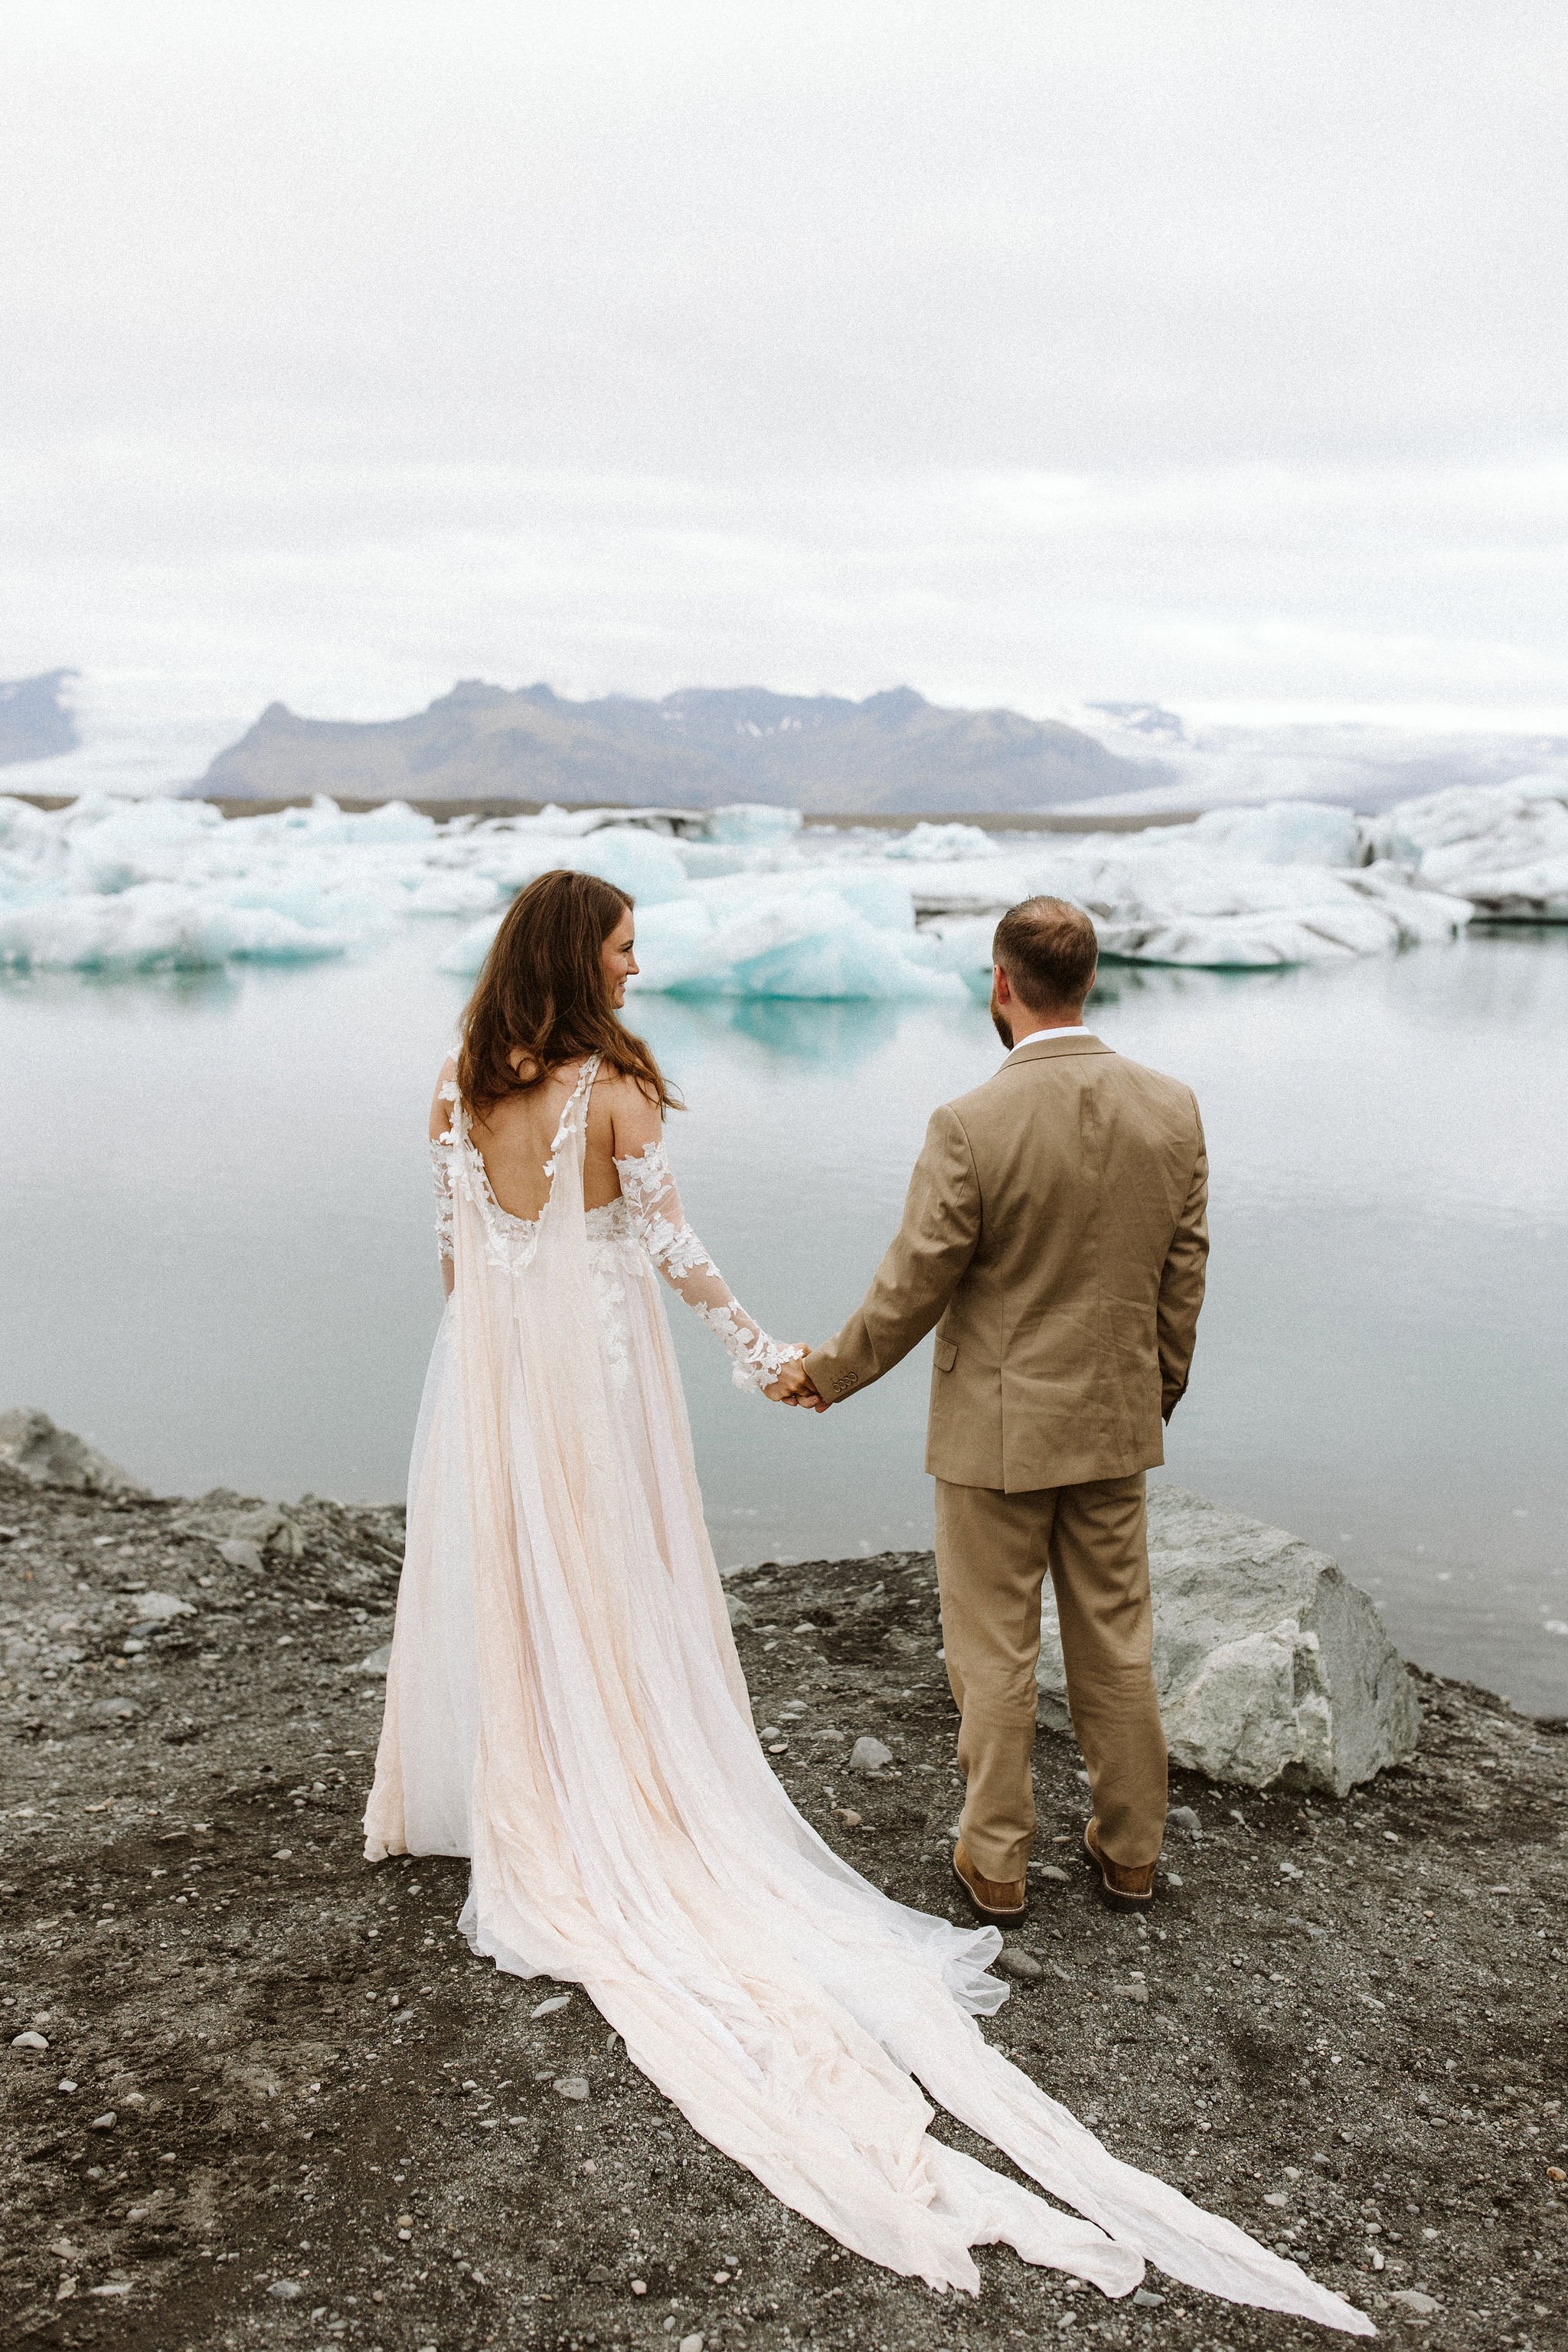  Custom wedding dress. Bride Jessica’s elopement in Iceland. Photo by  Evelyn Barkey Photography.   